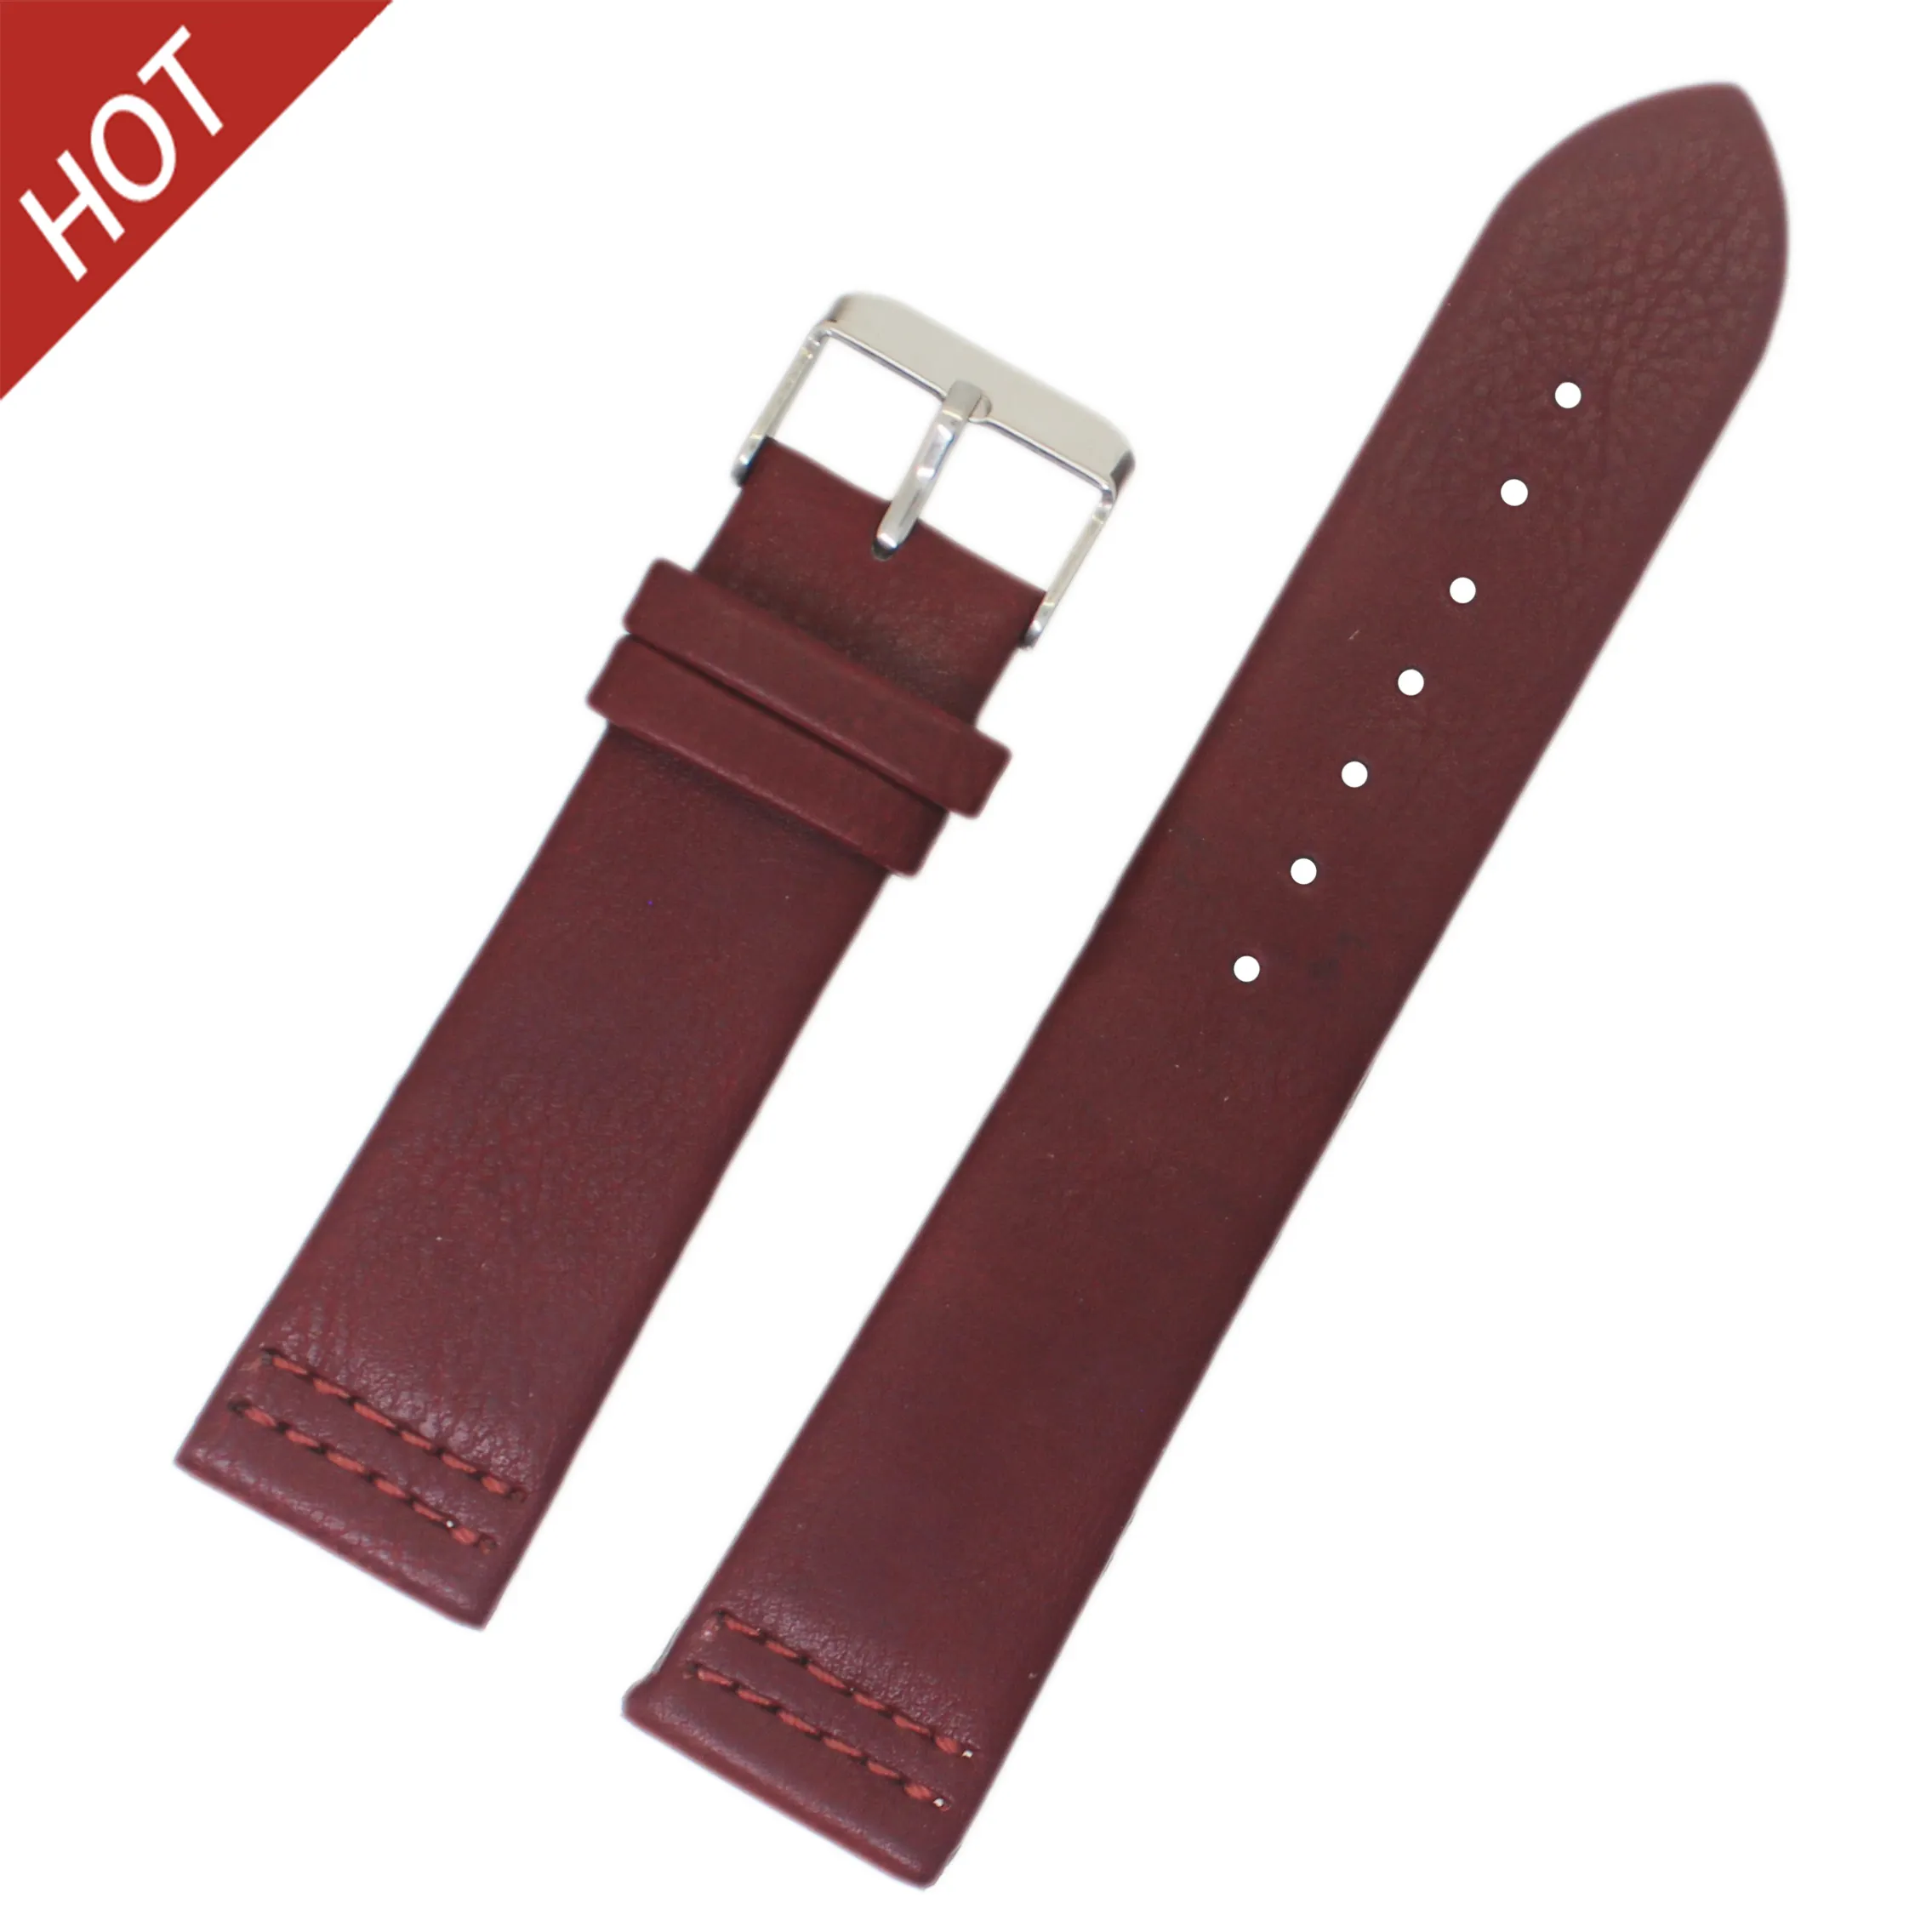 Watch Band Strap Custom Handmade Amazon Vintage Pin Skin Calf Skin Leather Men Wholesale Stainless Steel Pu Leather 18-26mm